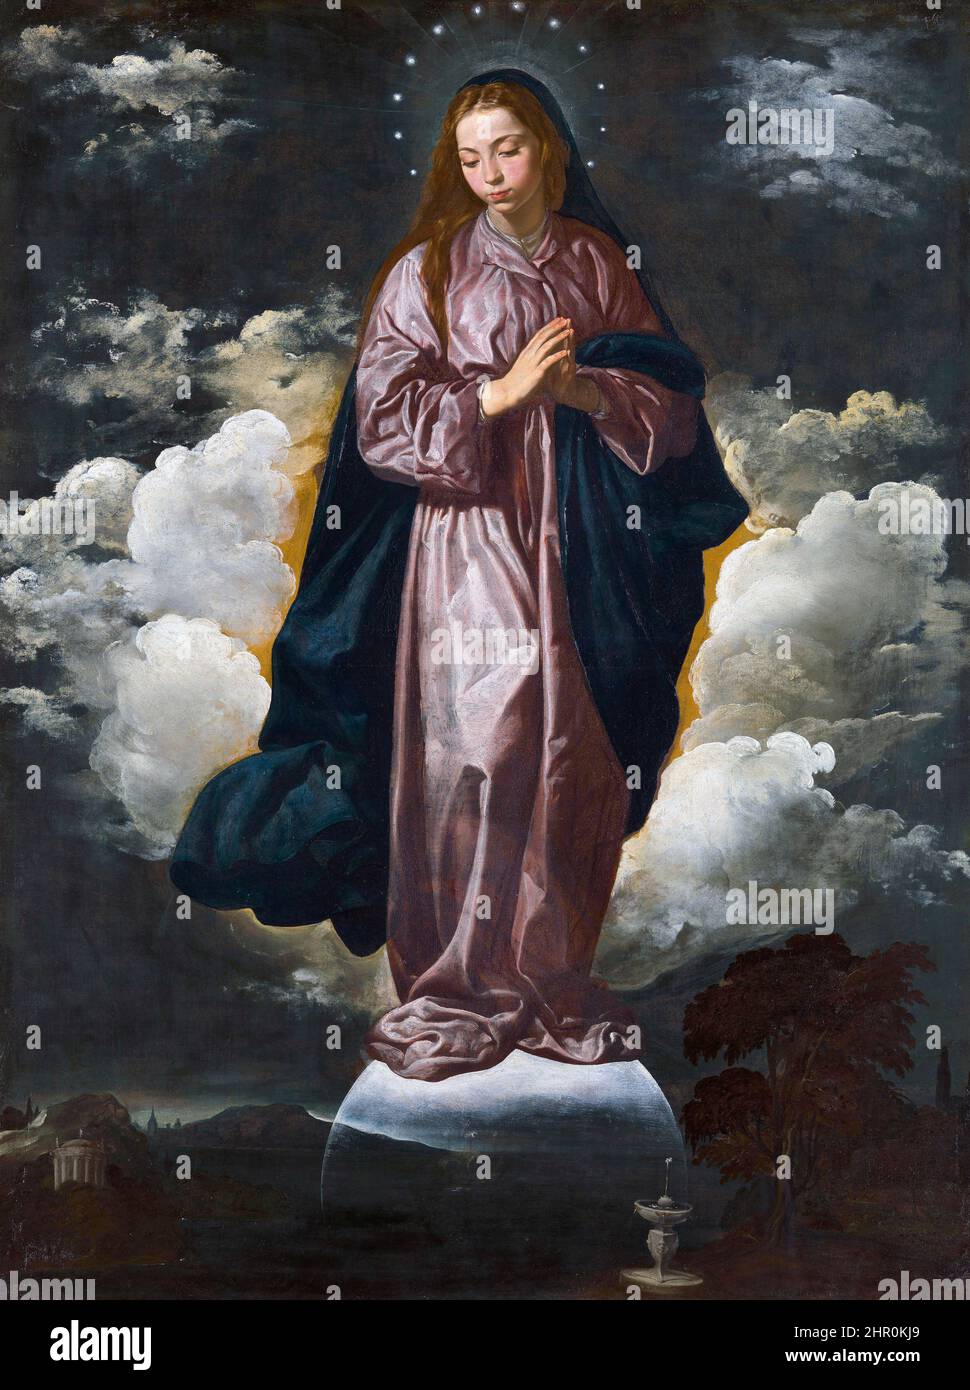 The Immaculate Conception by Diego Velazquez (1599-1660), oil on canvas, 1618/19 Stock Photo